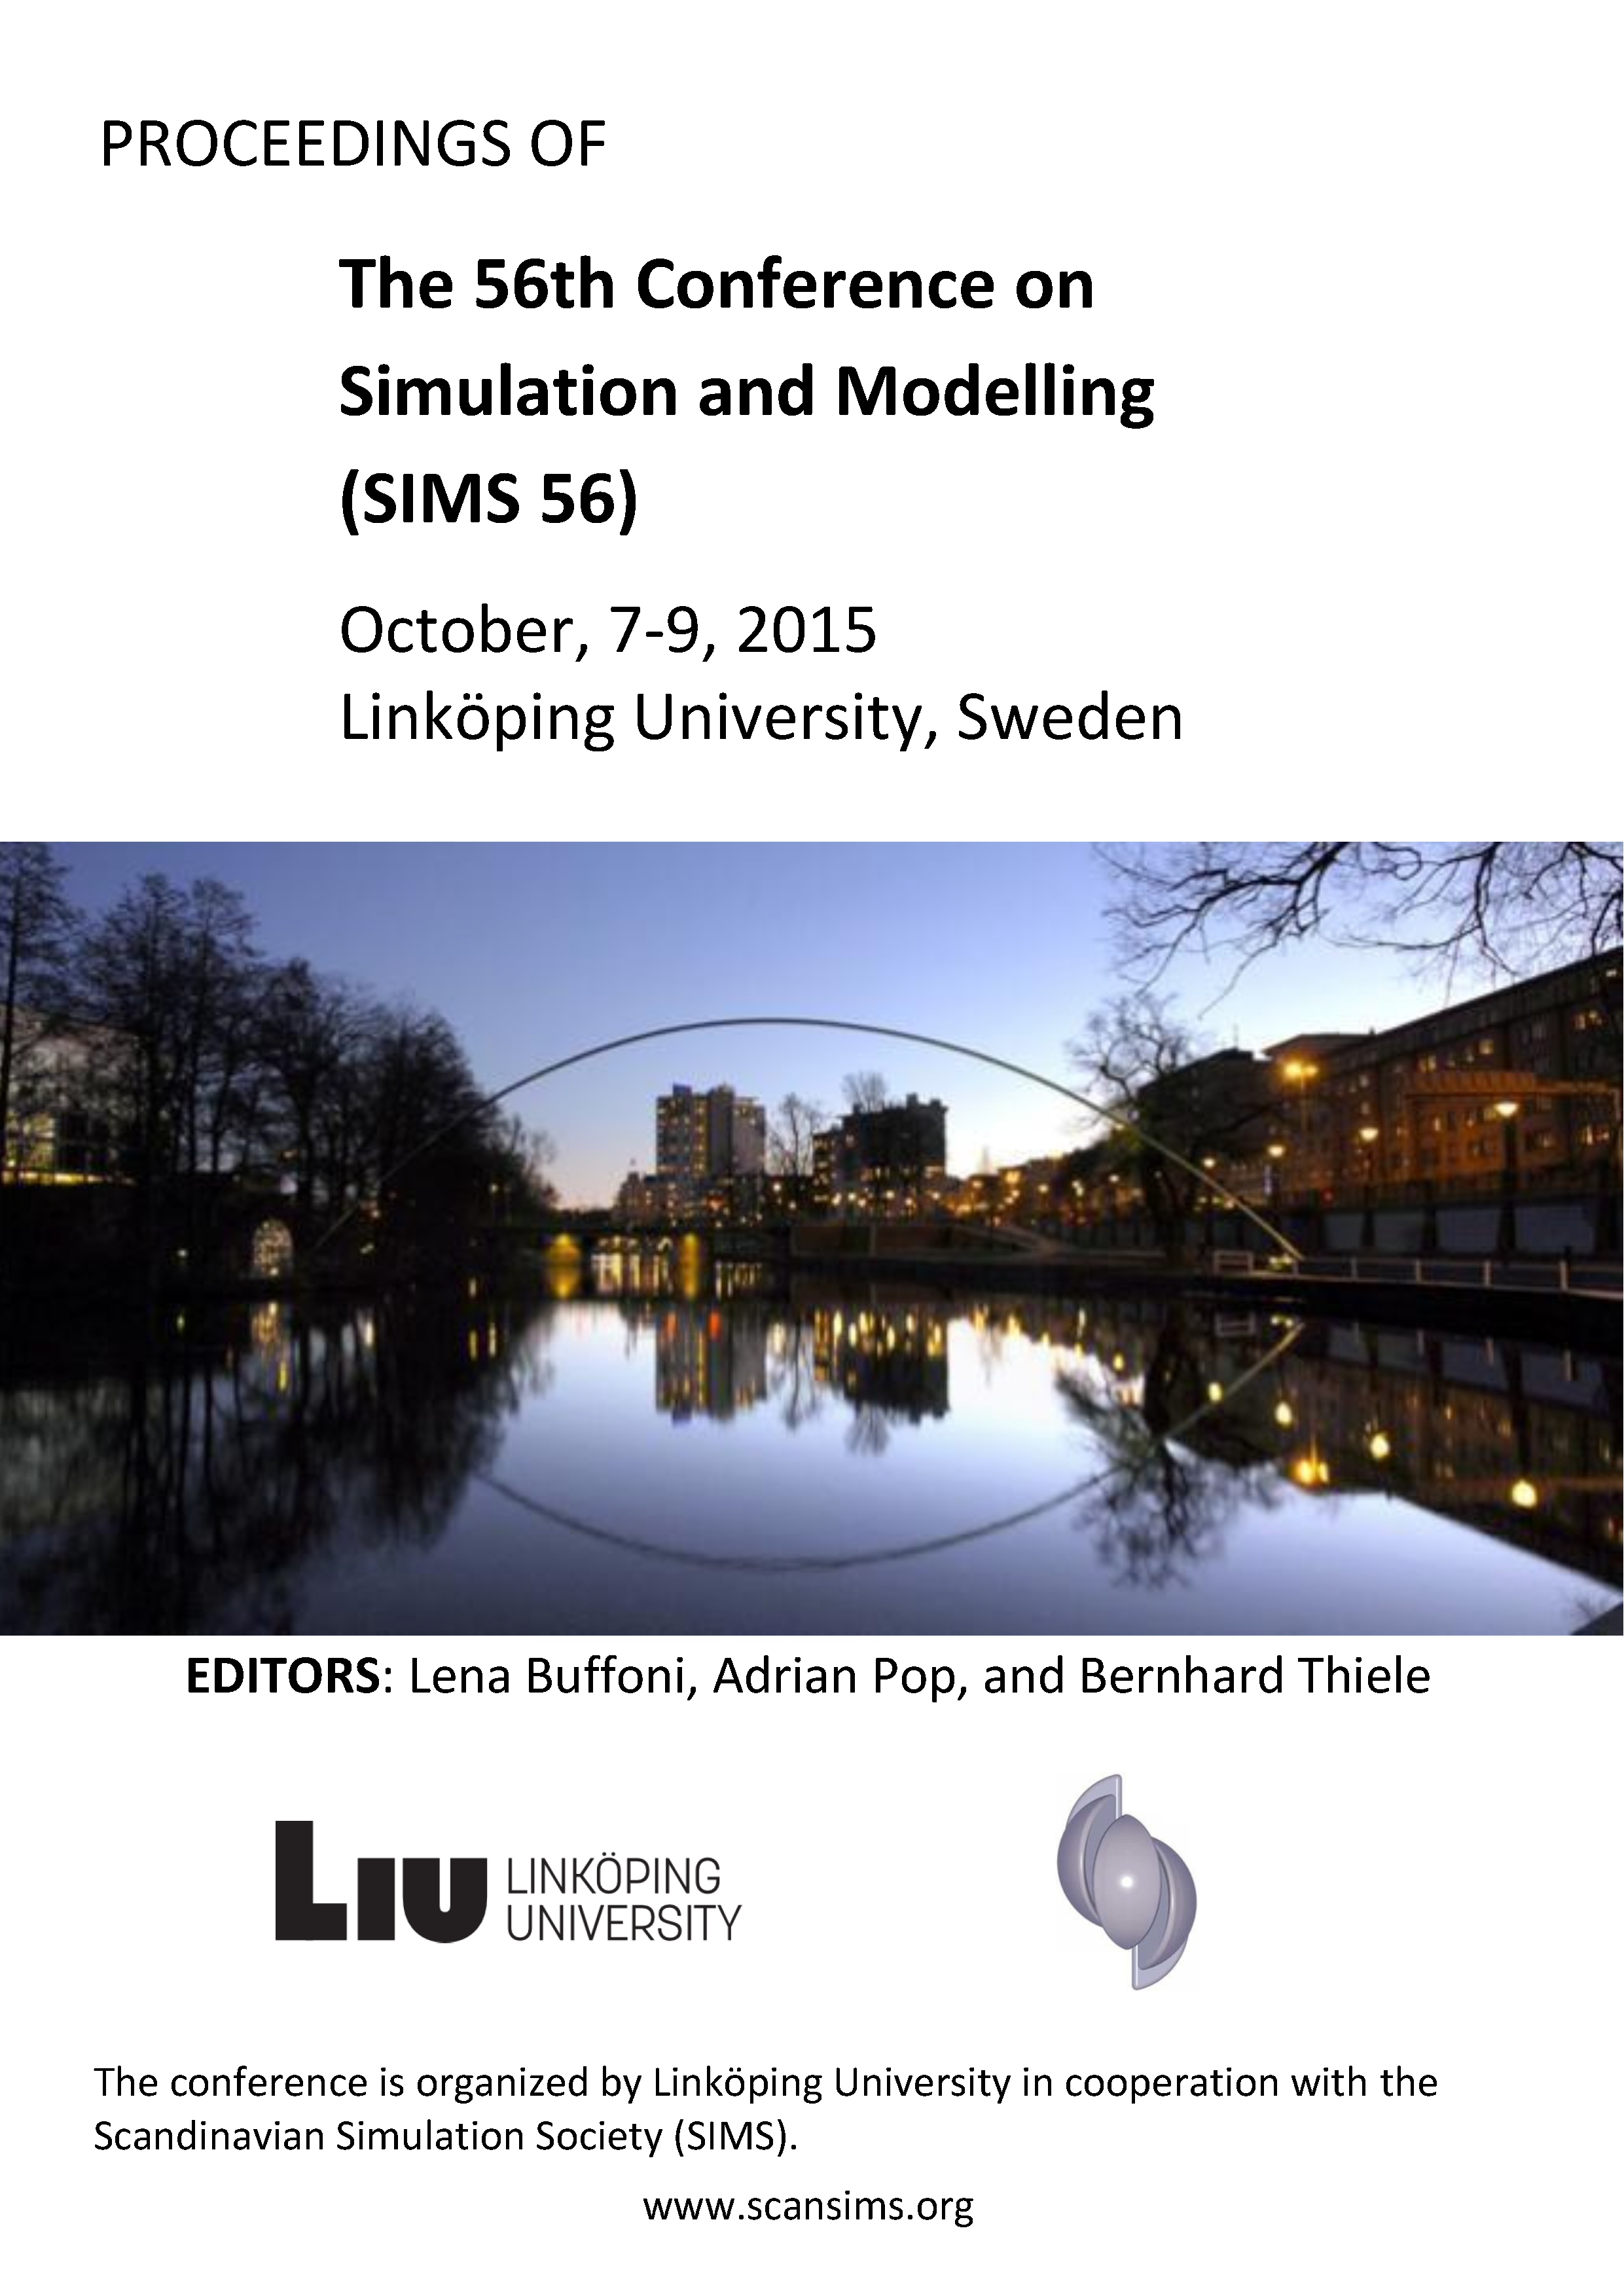 					View Proceedings of the 56th Conference on Simulation and Modelling (SIMS 56), October, 7-9, 2015, Linköping University, Sweden
				